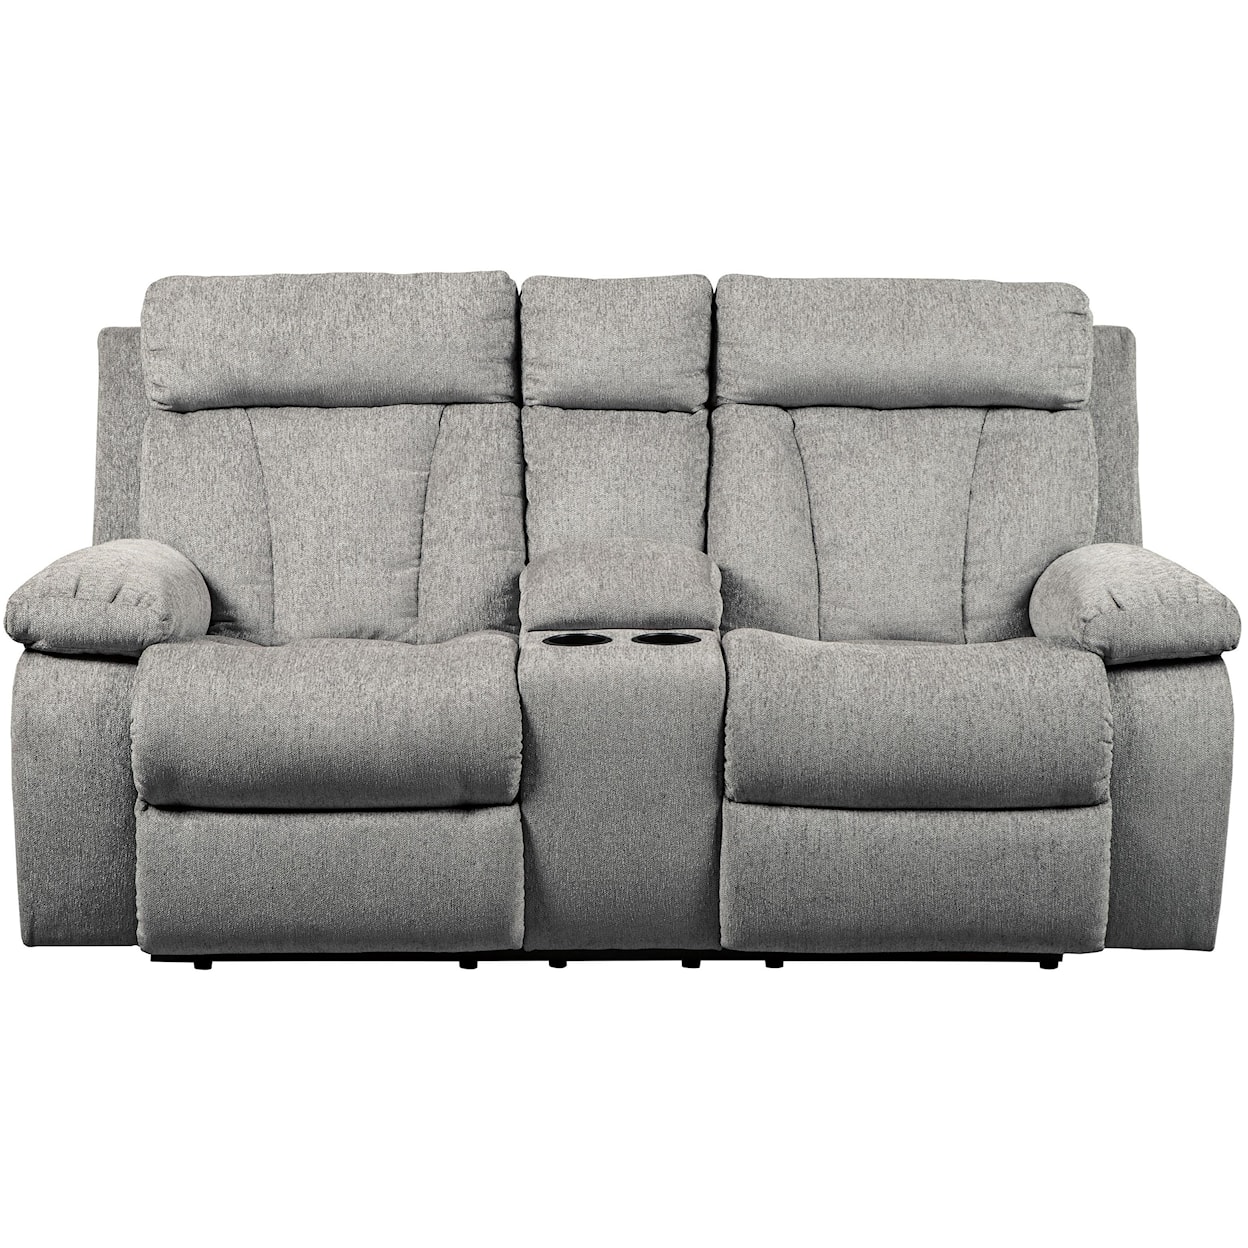 Signature Design by Ashley Furniture Mitchiner Double Reclining Love Seat